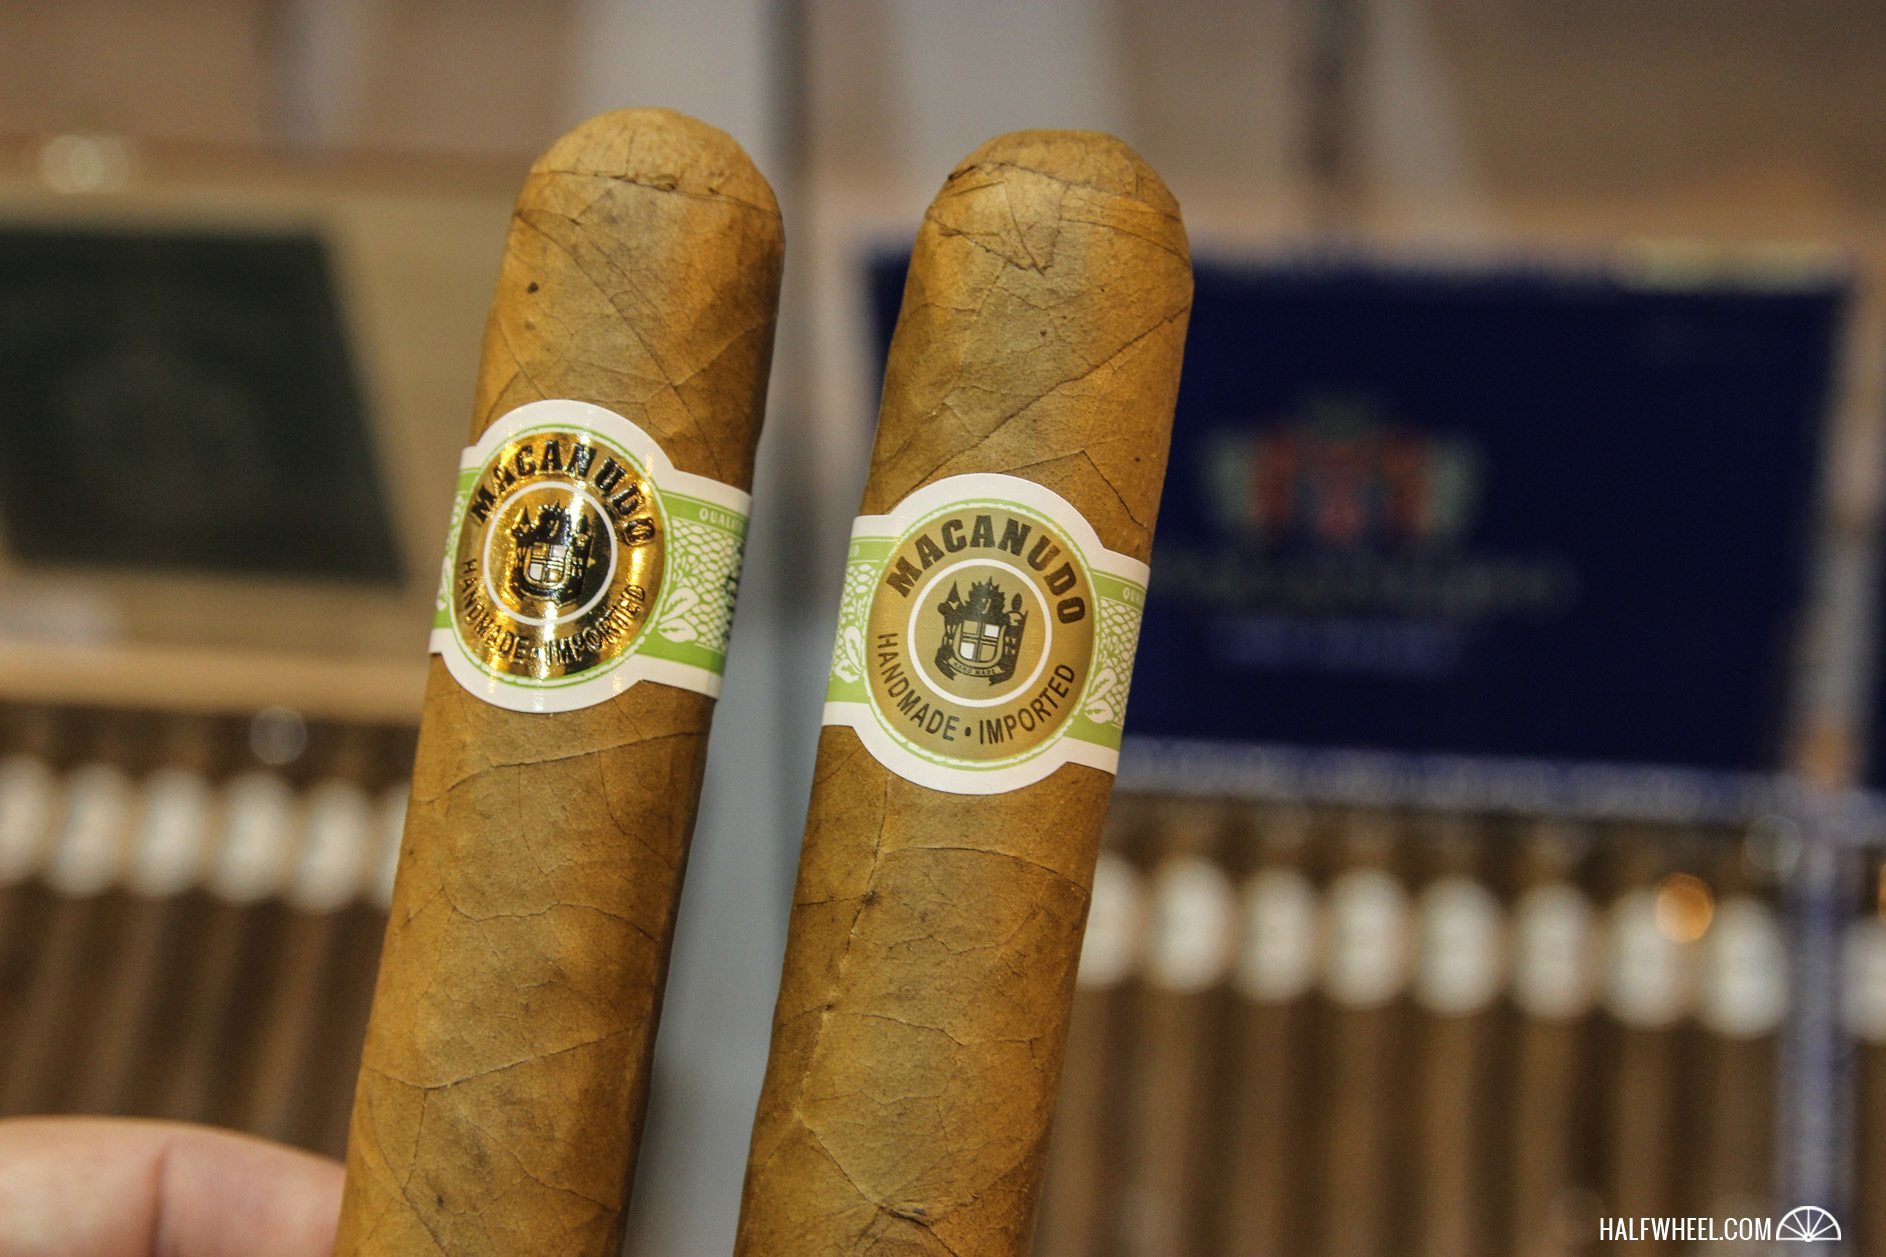 General Cigar Macanudo bands side-by-side